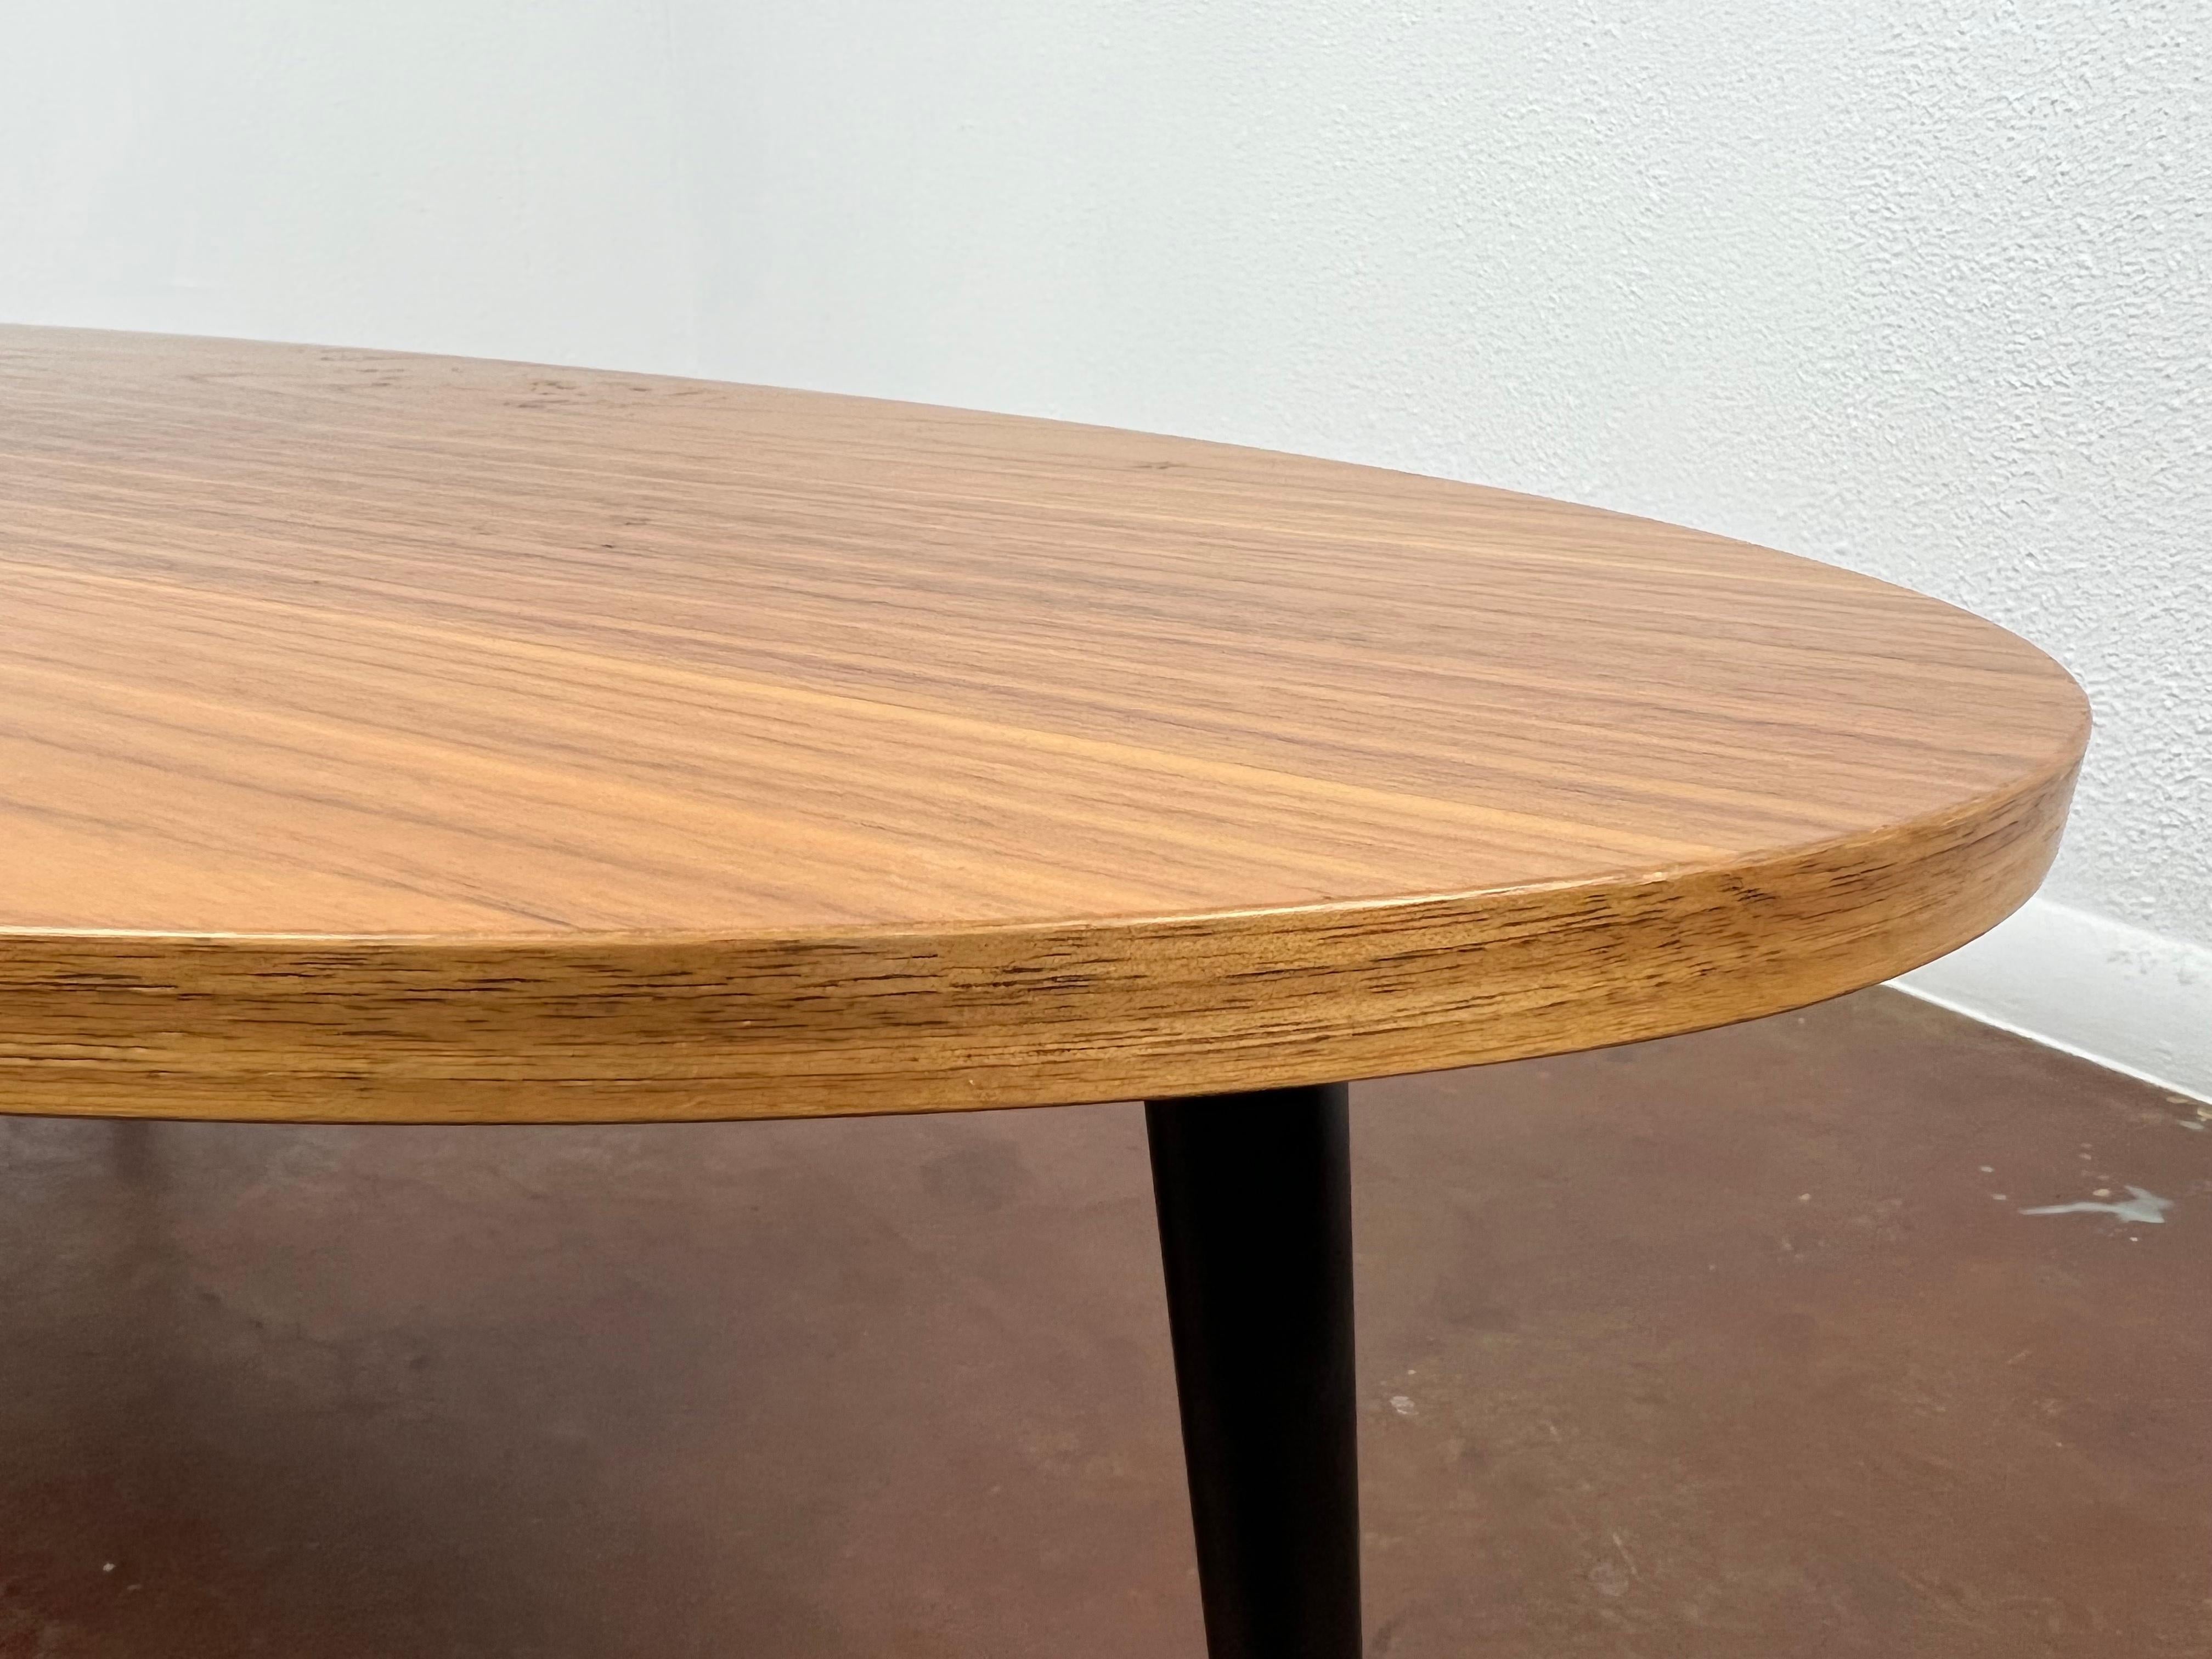 Sleek mid-century design solid wood surfboard coffee table. Features curved lip edge and 4 tapered turned legs. Sturdy and structurally sound. Has some expected slight finish wear and scratching.